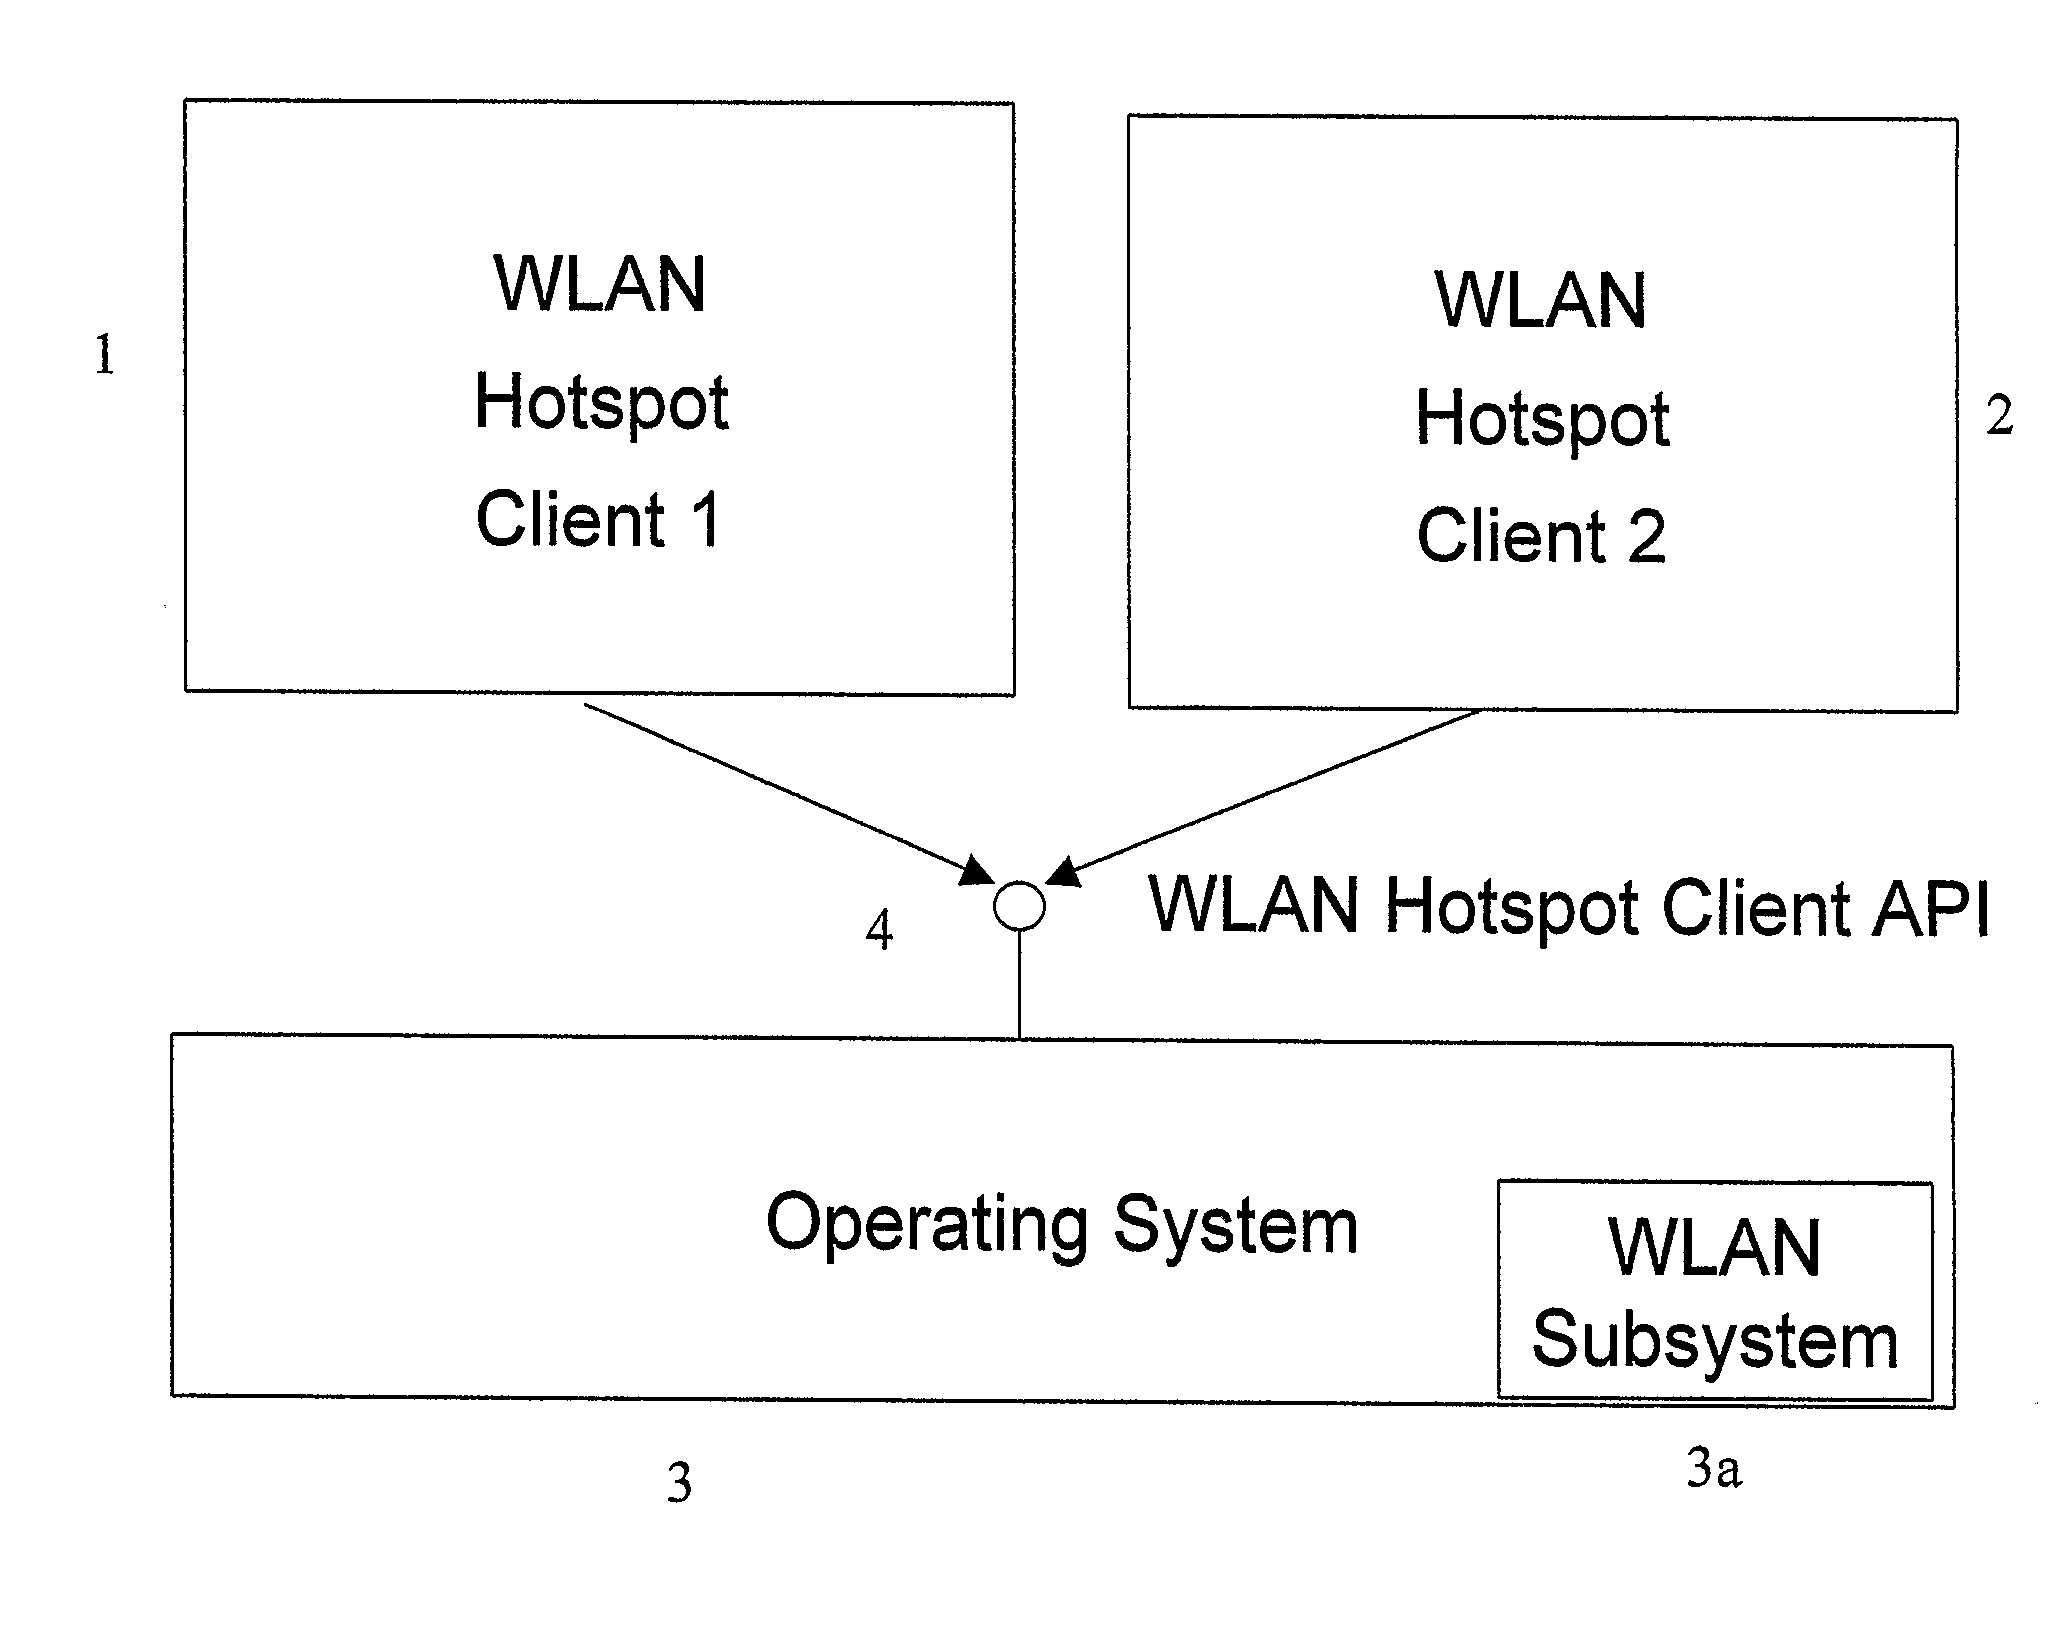 Support for integrated WLAN hotspot clients